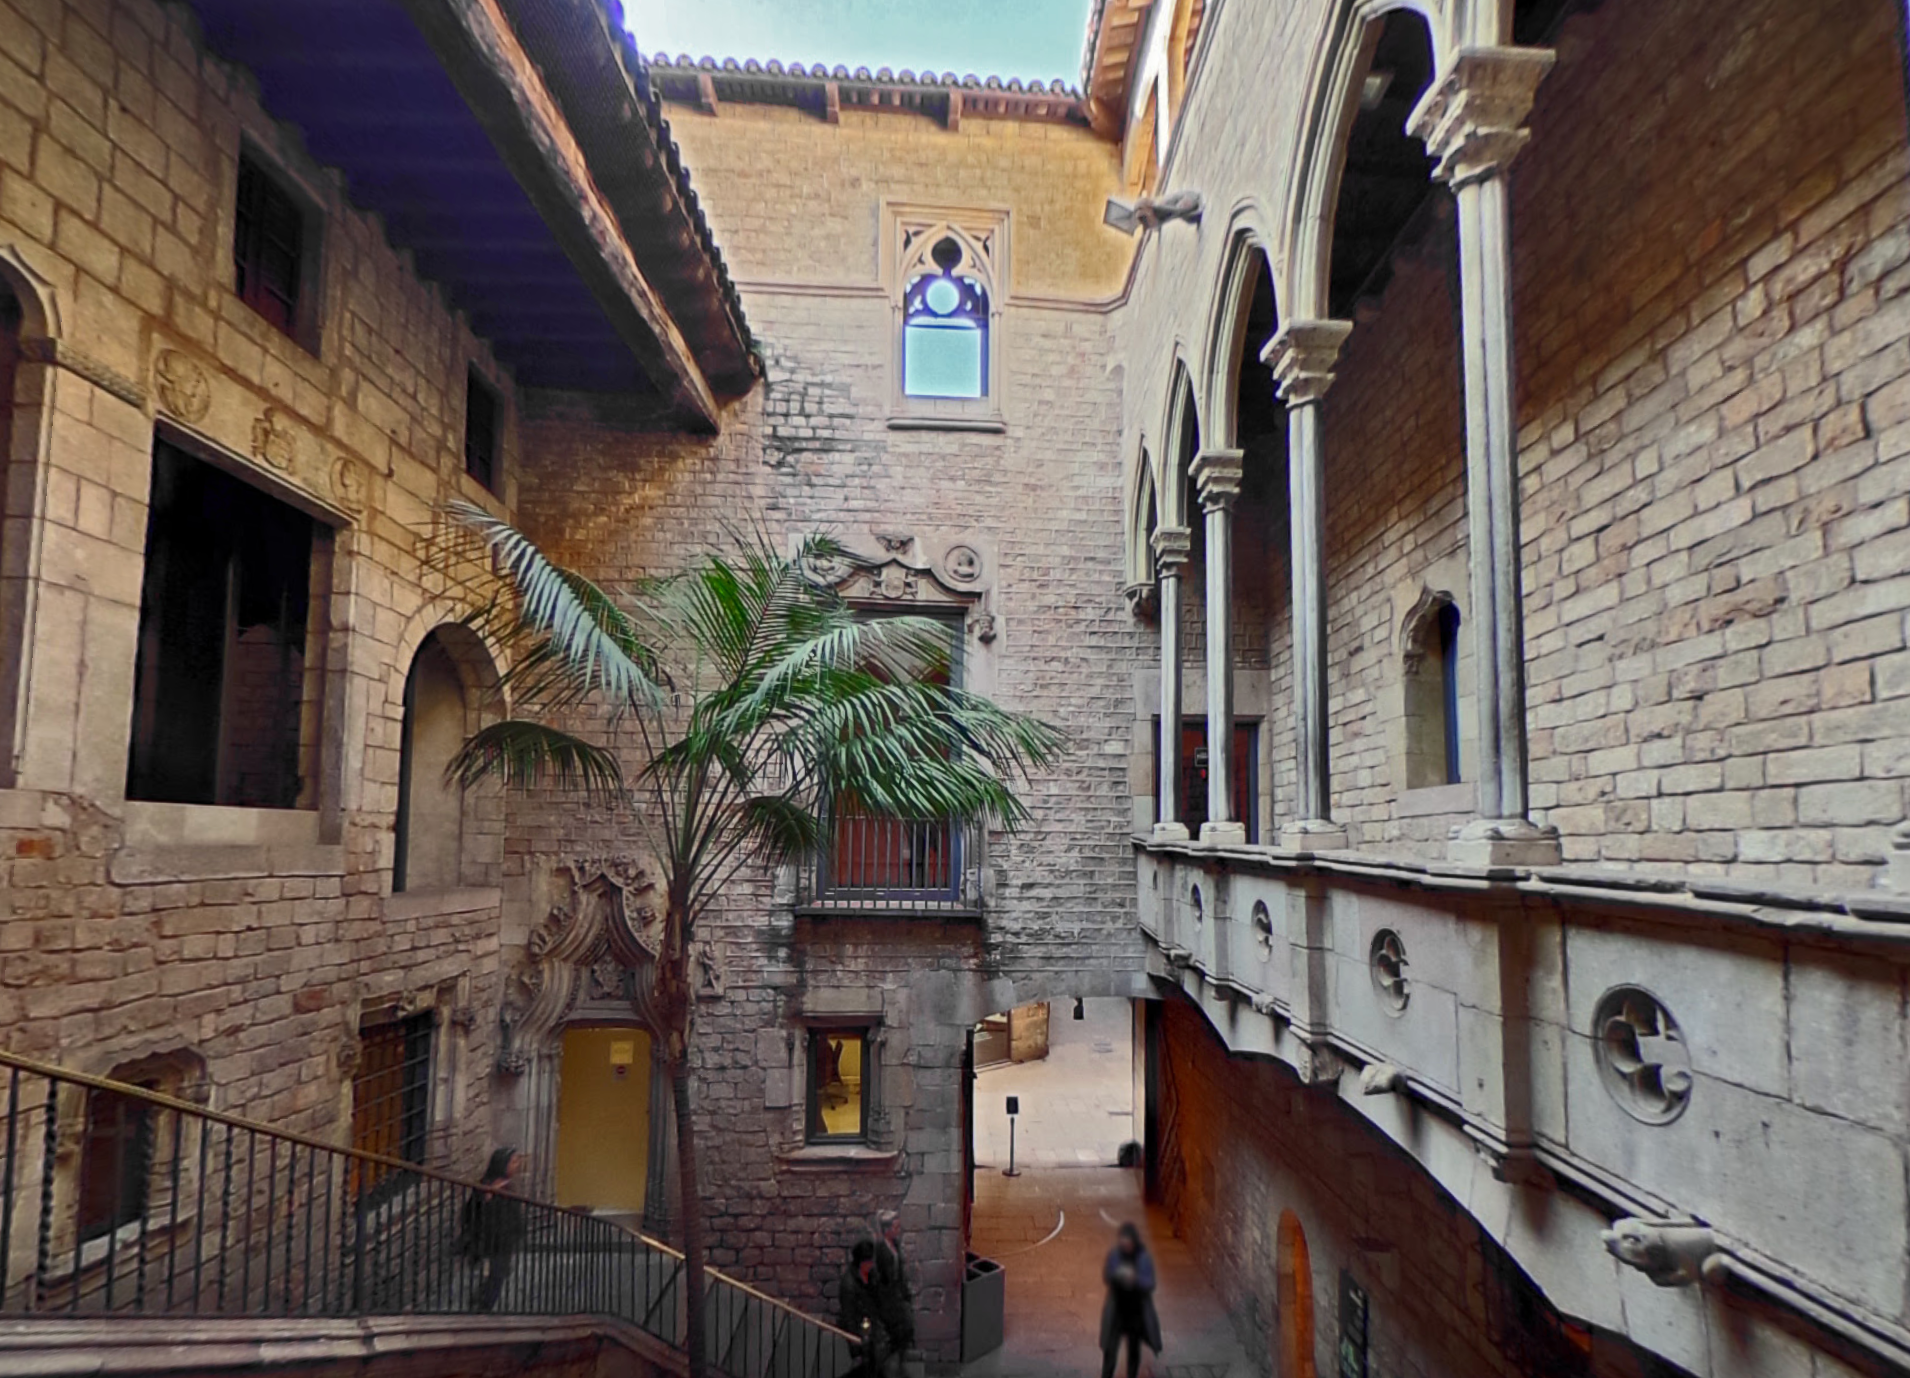 Picasso Museum by Google Earth